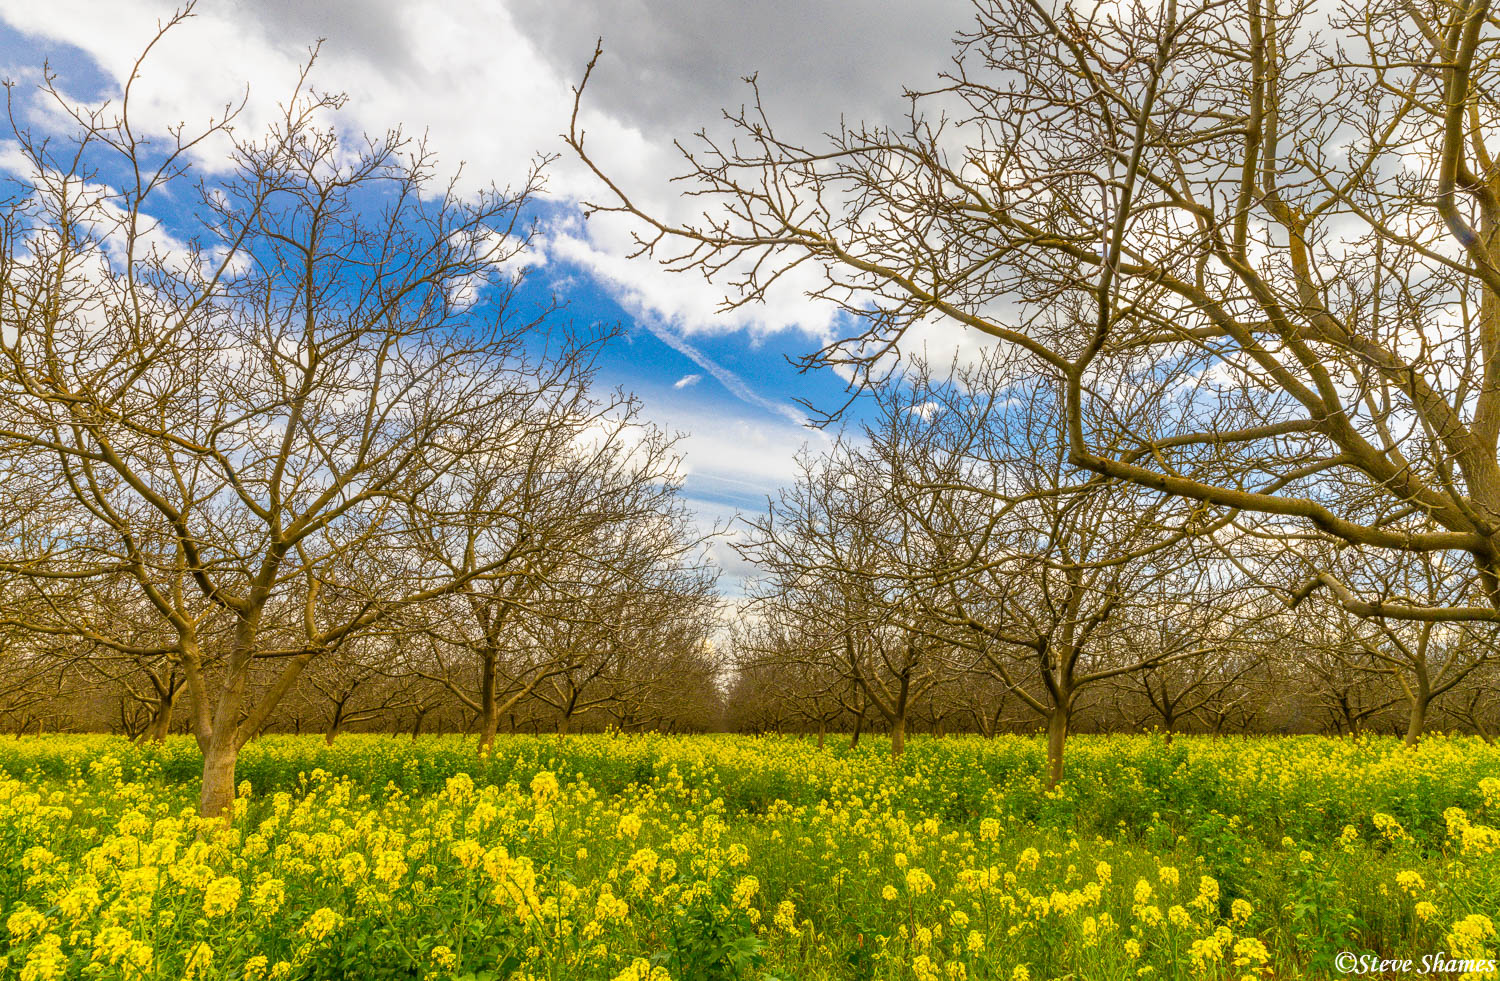 Colorful wild mustard and a great sky -- the perfect combination to liven up an ordinary looking orchard!